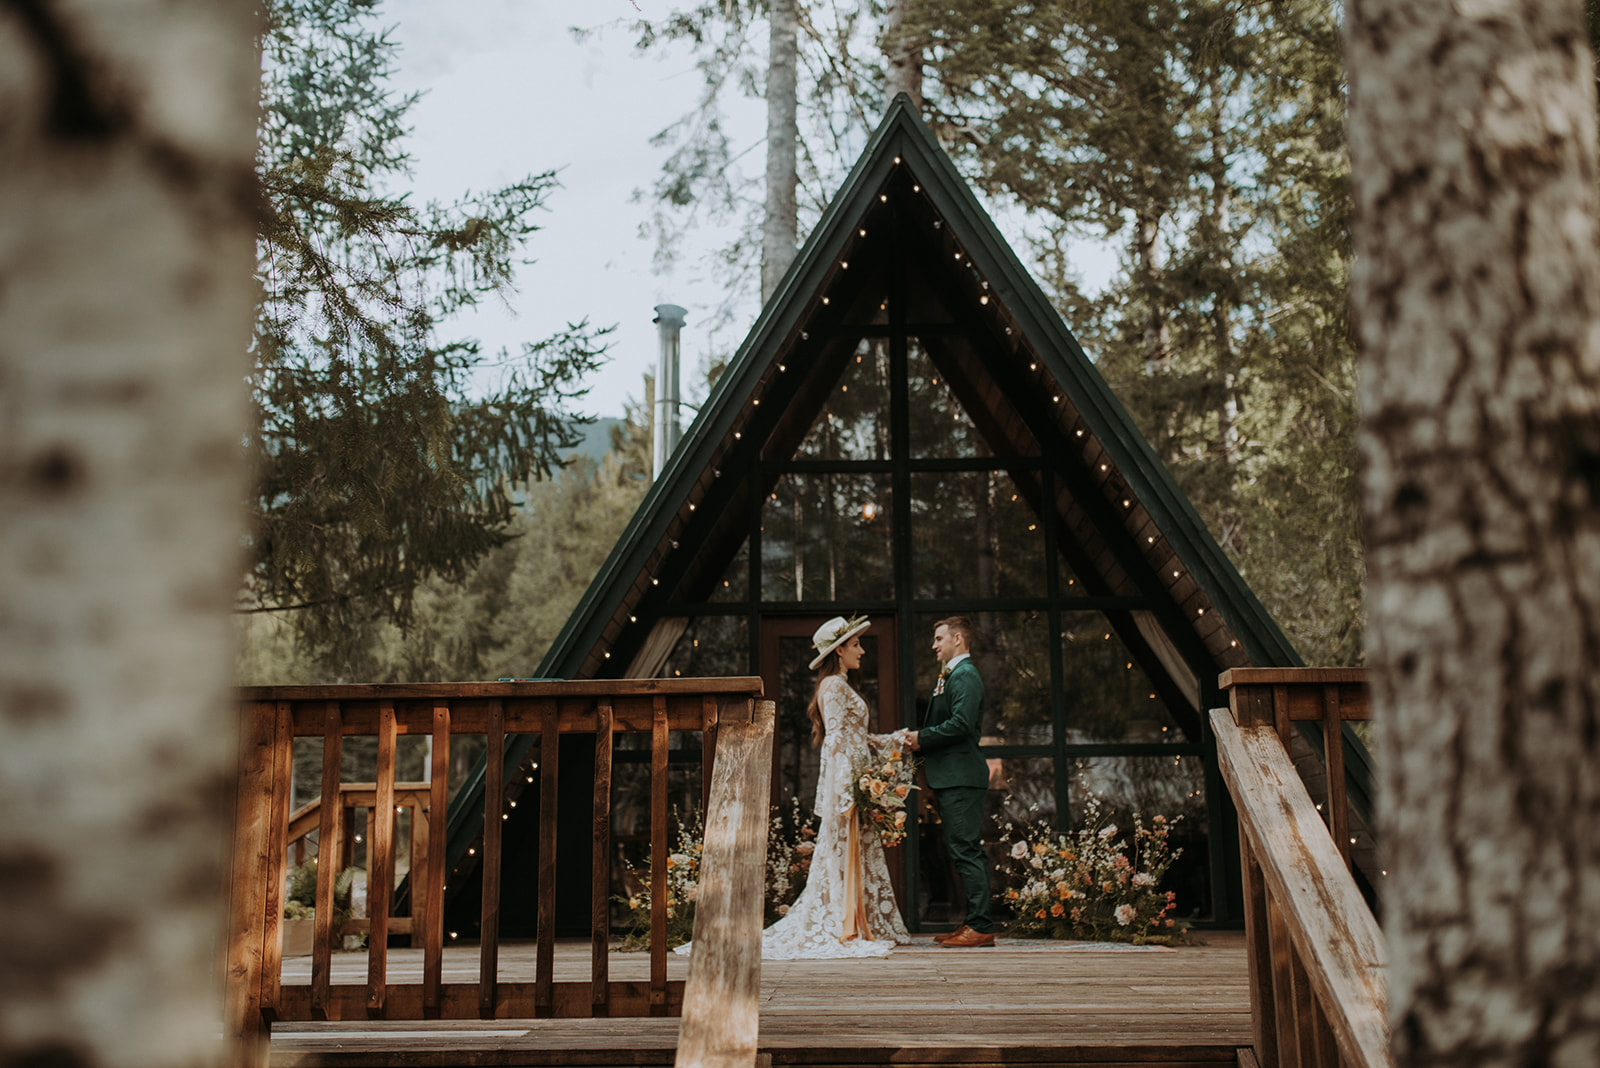 Mount Rainier elopement photographer captures intimate moment at cozy a-frame cabin, Woodsy wedding details, first look